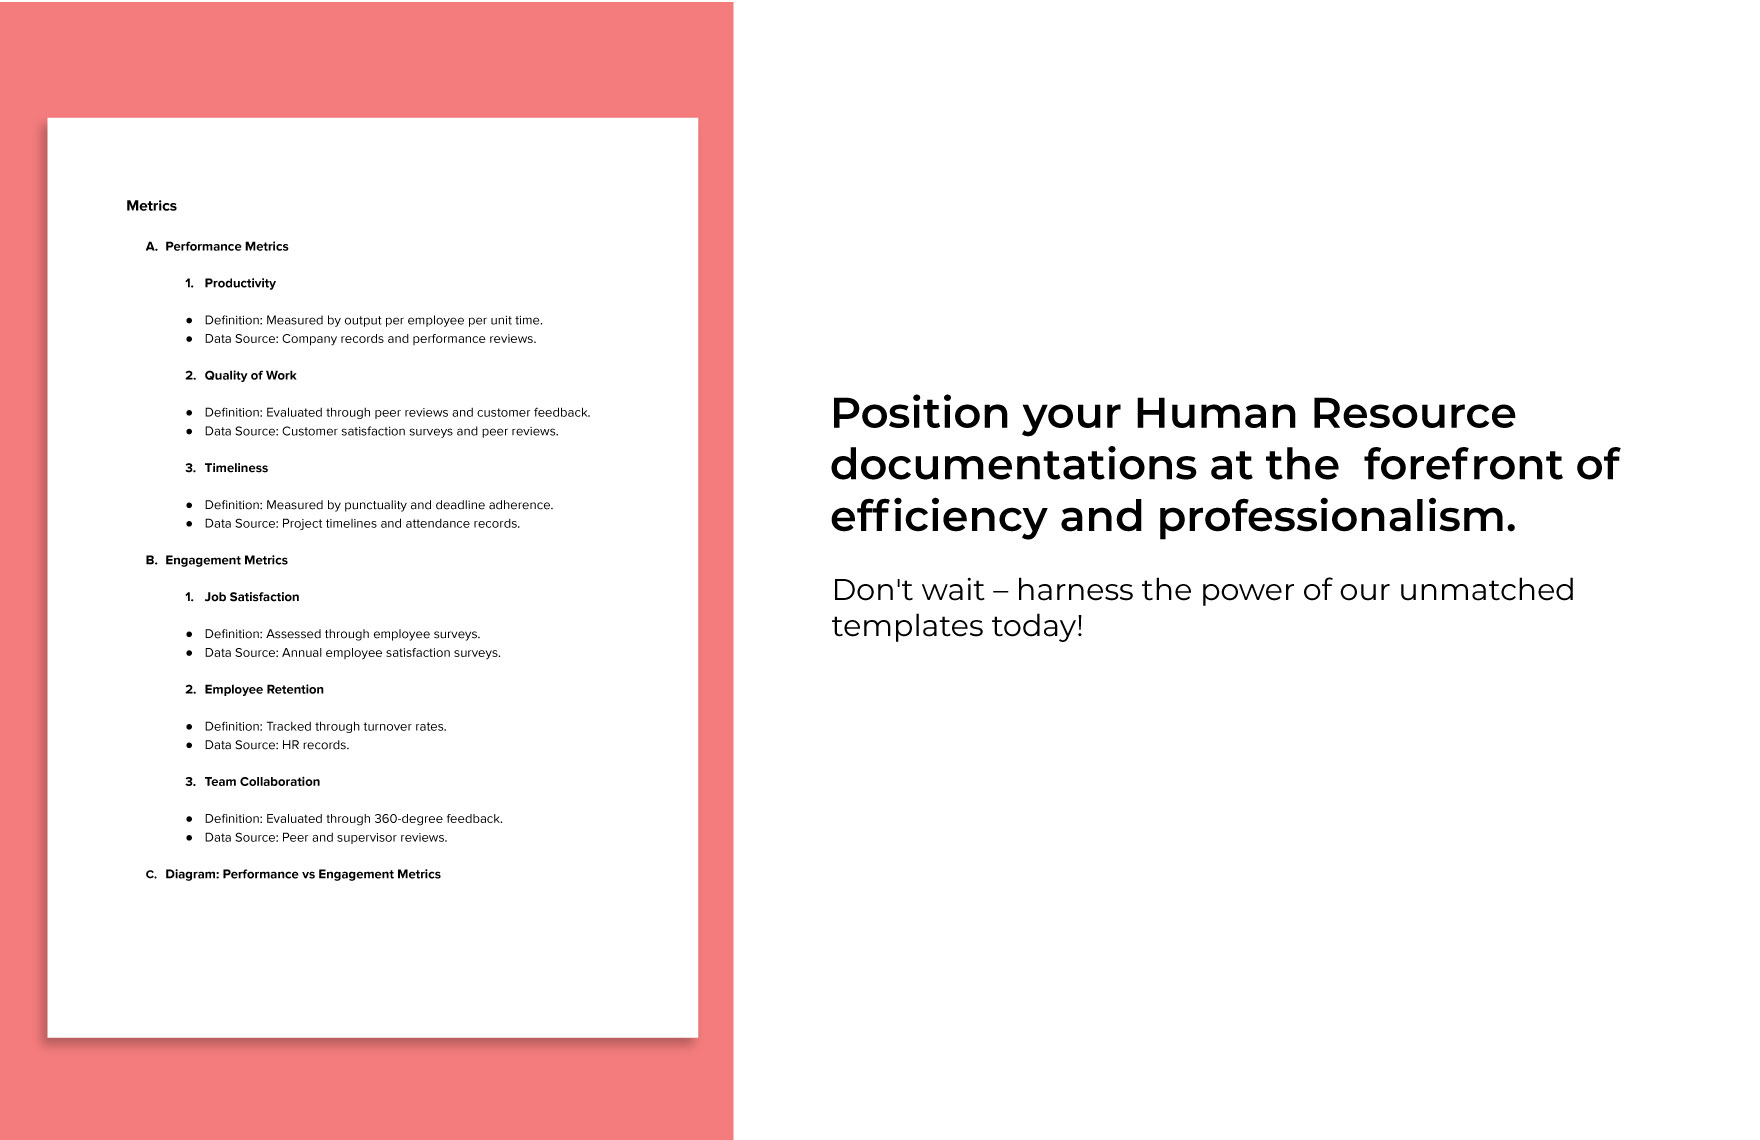 Performance and Engagement Correlation Study HR Template